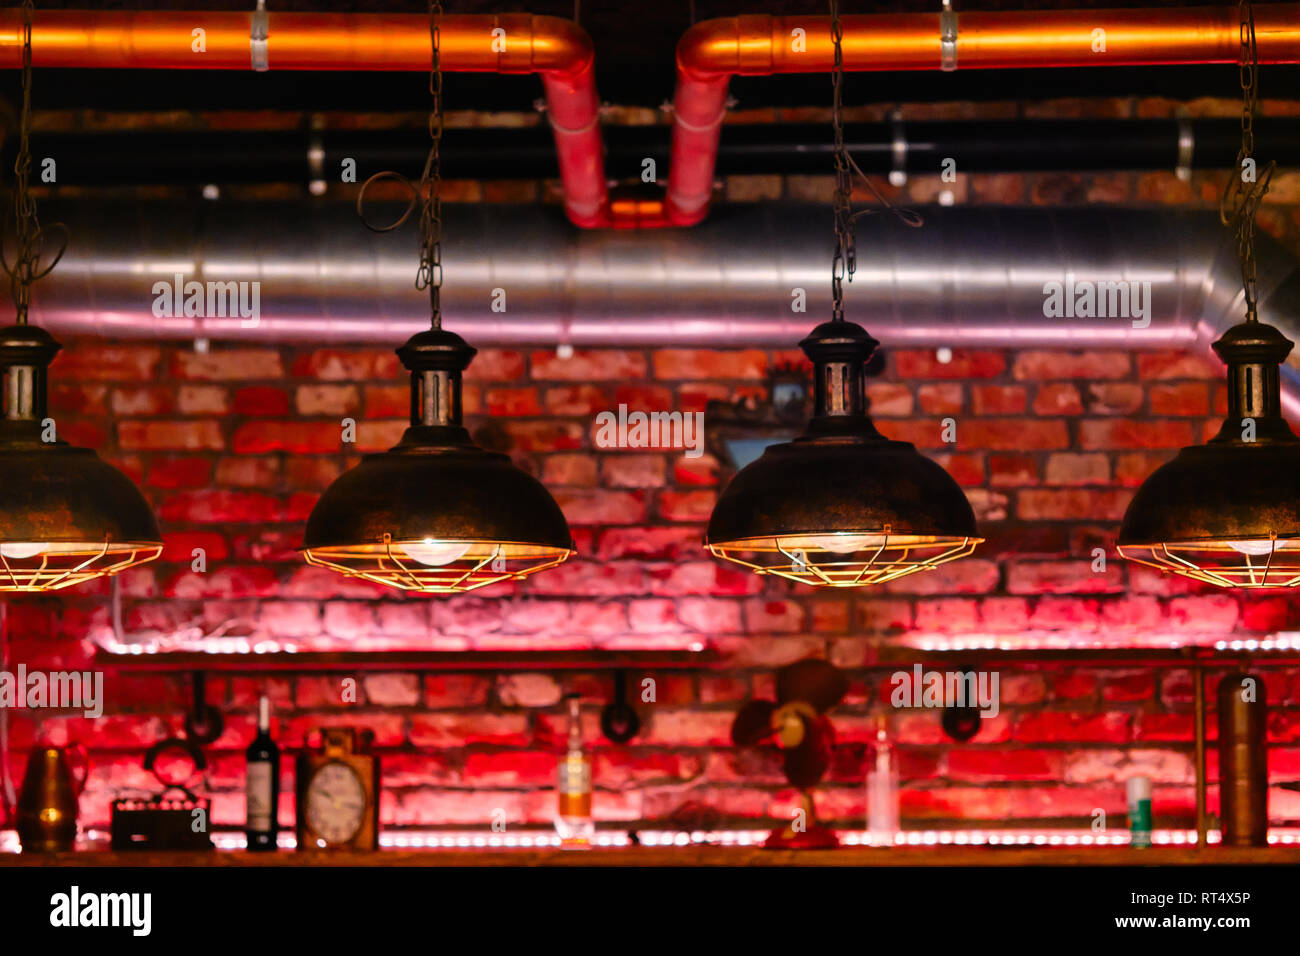 Steampunk style design element unusual lamps hanging in a row view over red brick wall inside cafe or restaurant Stock Photo